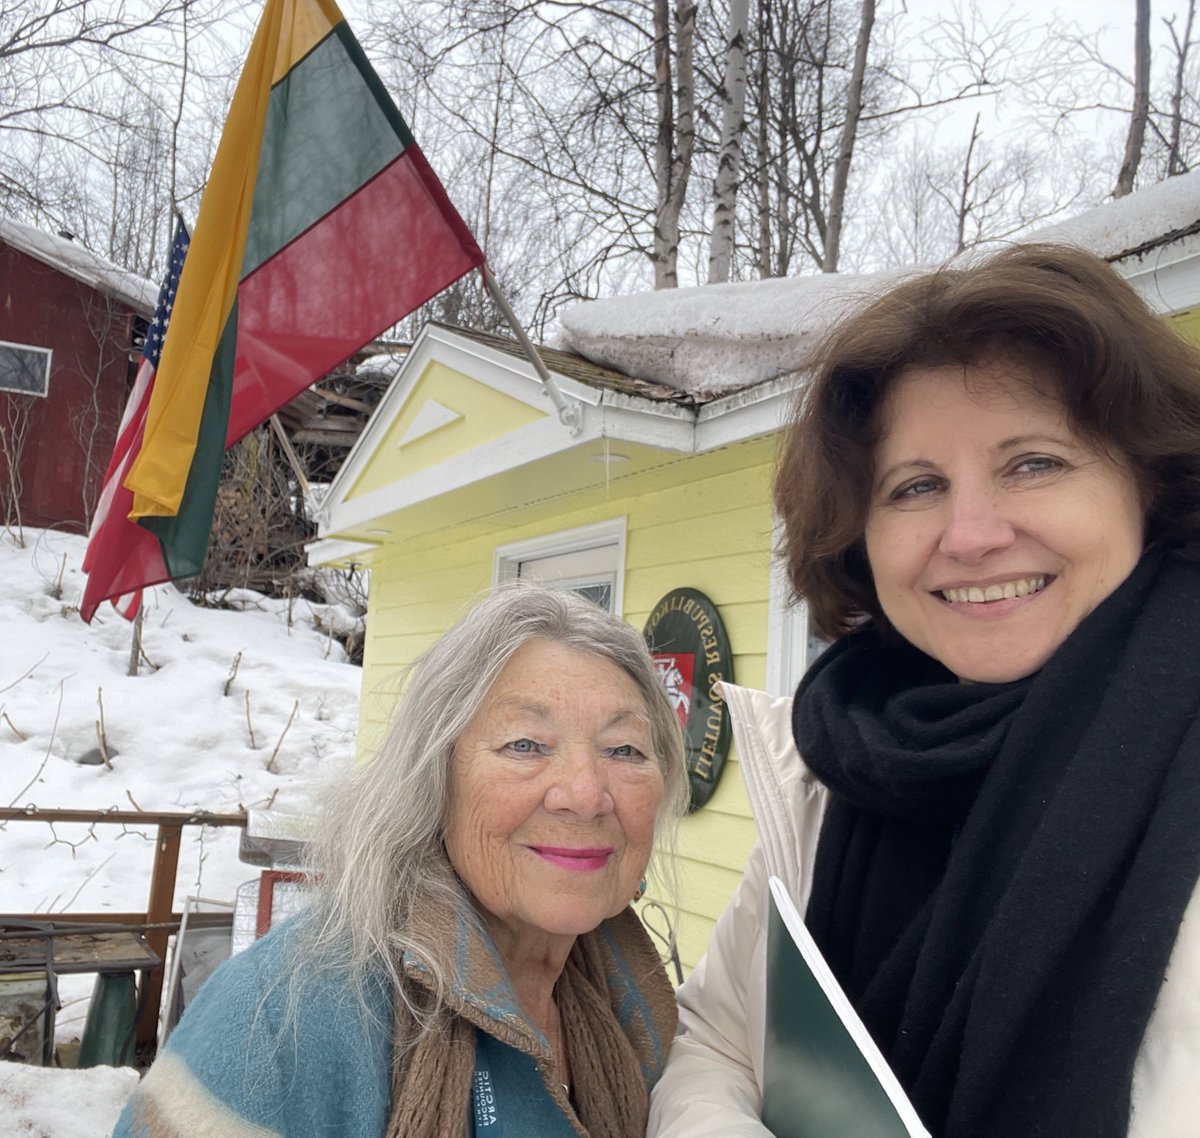 While in Anchorage, Alaska, one of must-to-do and enjoy thing is to meet local Lithuanian community. Thank you Svaja Vansauskas Worthington our Honorary Consul for making it happen and for keeping Lithuanian spirit strong and present #Alaska @LTembassyUS